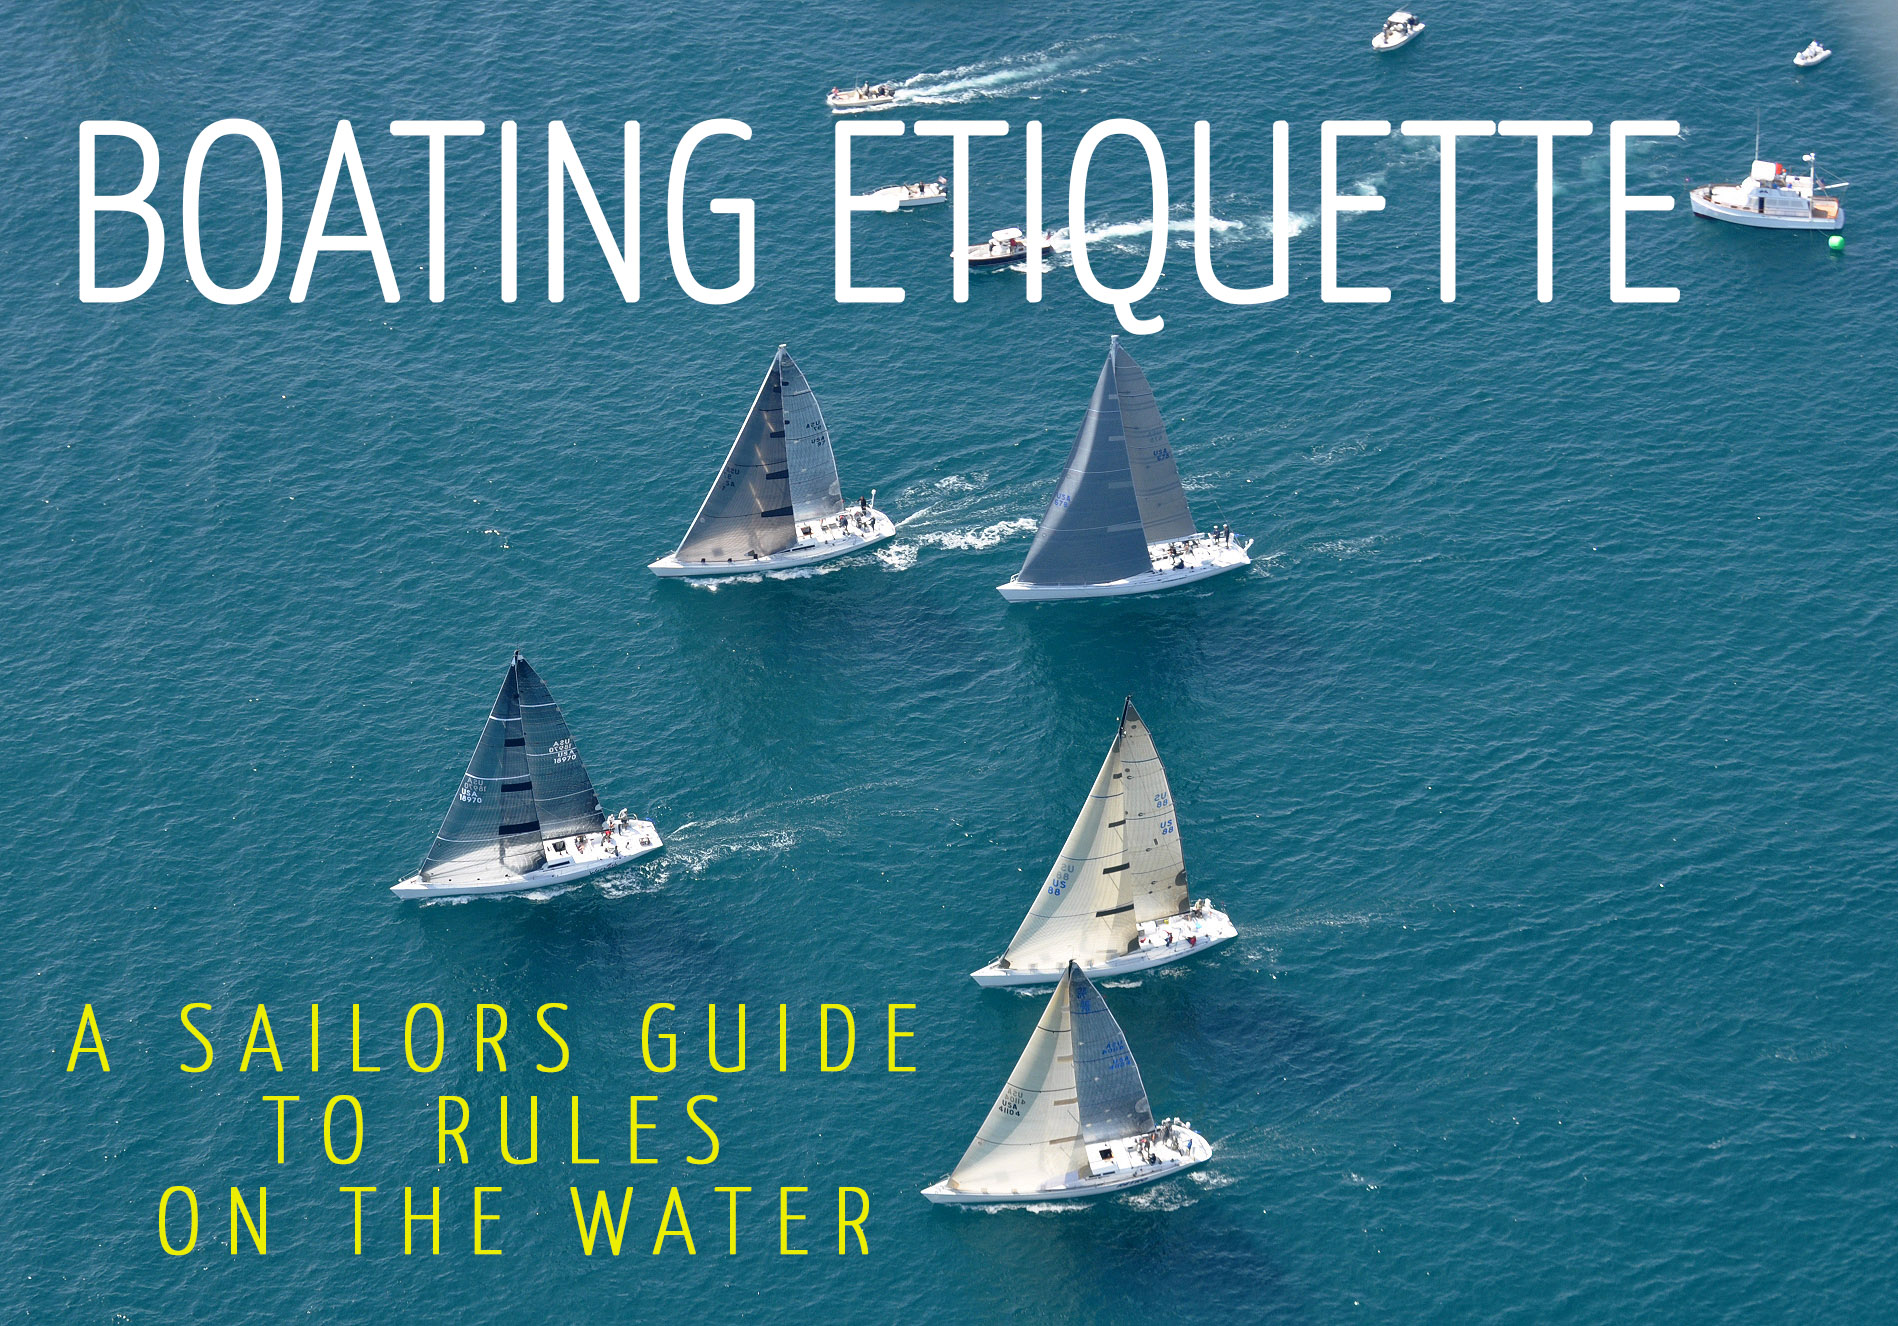 Read our post about Boating Etiquette for sailboats.